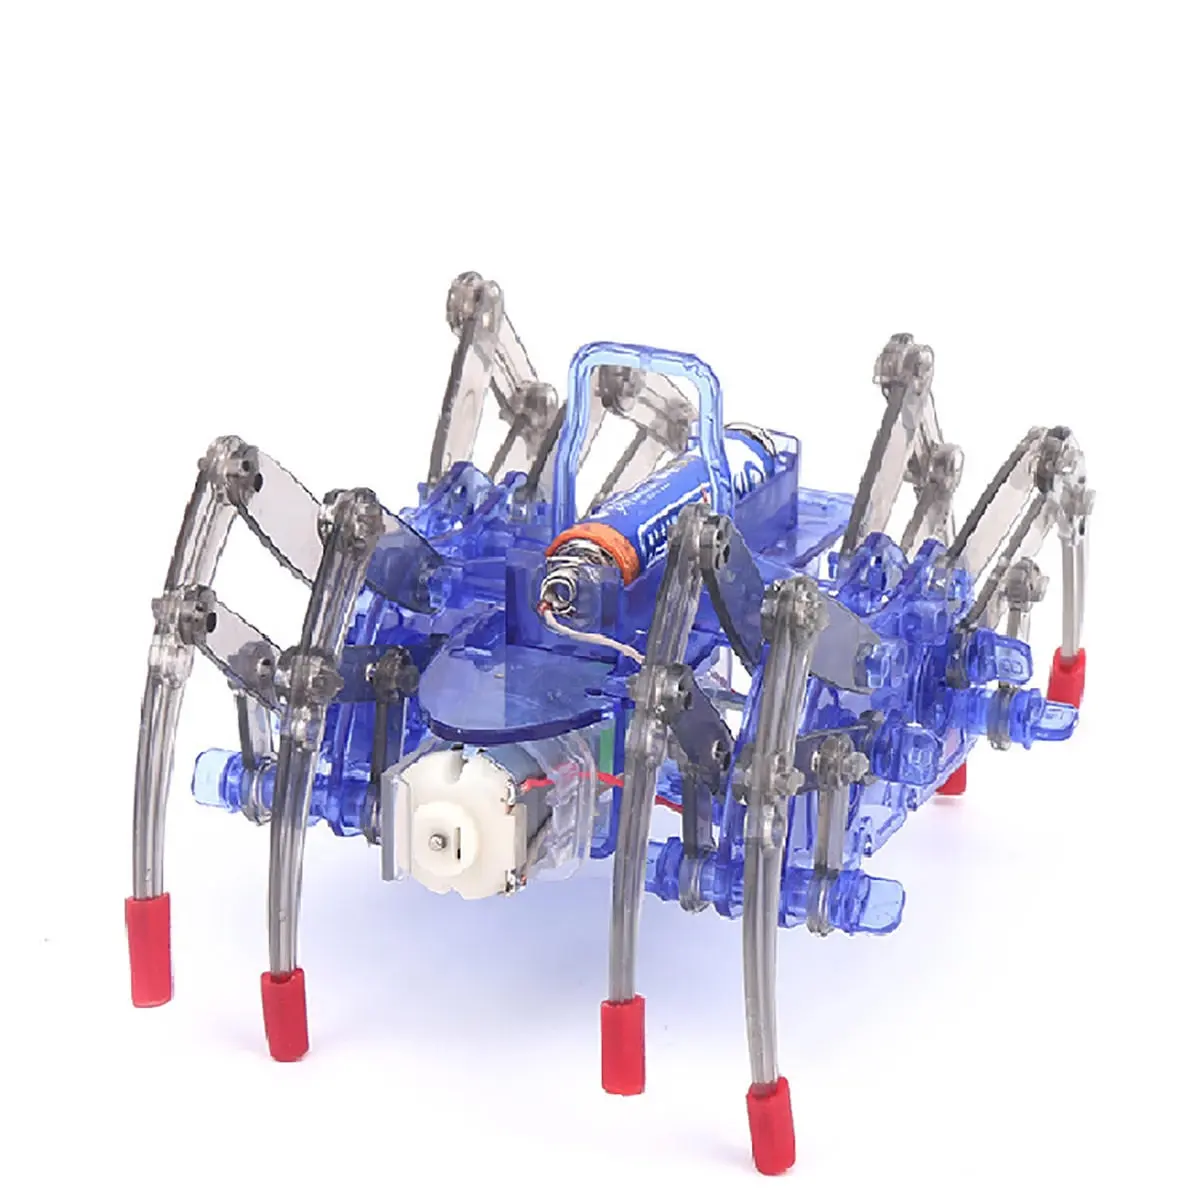 Children's Electric Spider Robot DIY Assembly Steam Toys Educational Model For Kids